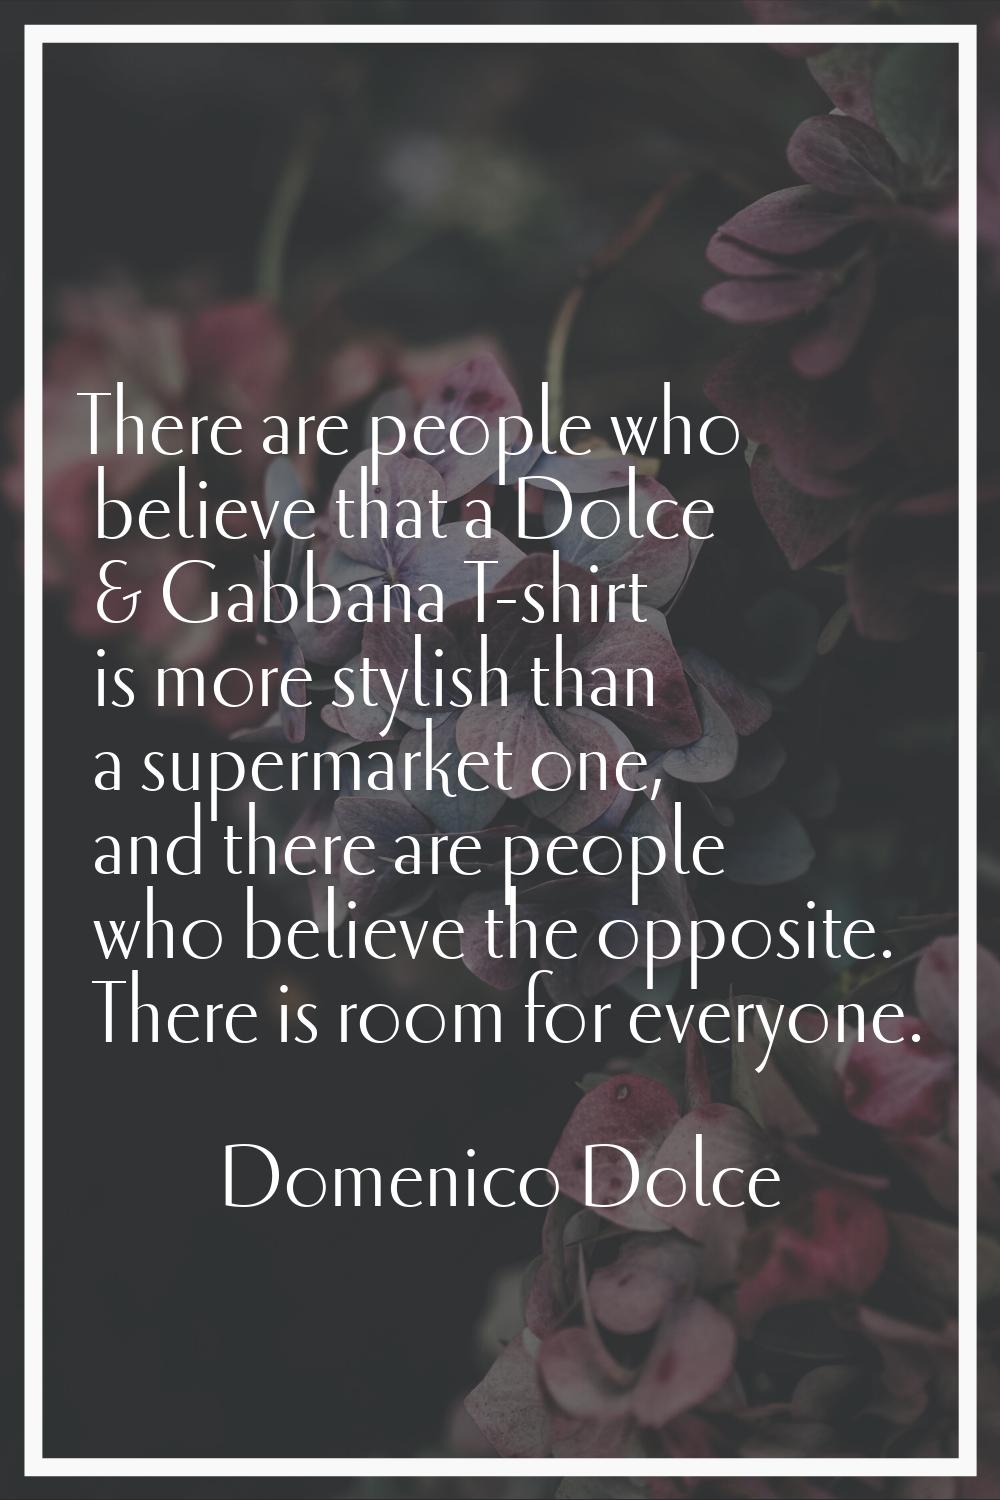 There are people who believe that a Dolce & Gabbana T-shirt is more stylish than a supermarket one,